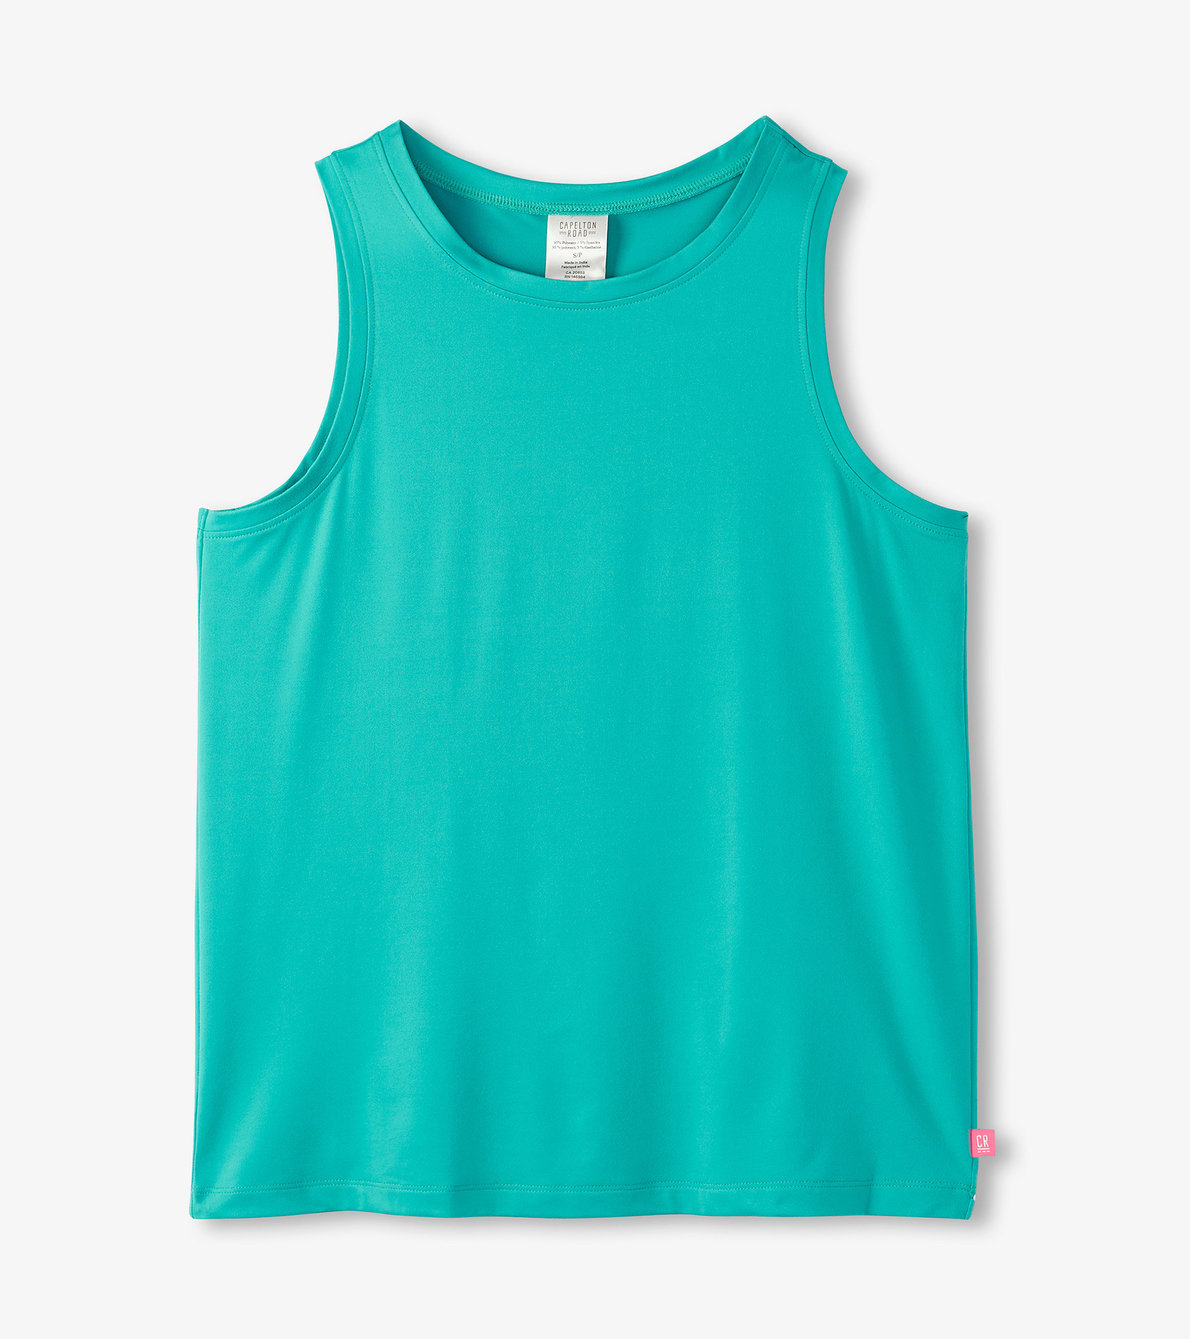 View larger image of Capelton Road Women's Baltic Scoop Neck Tank Top